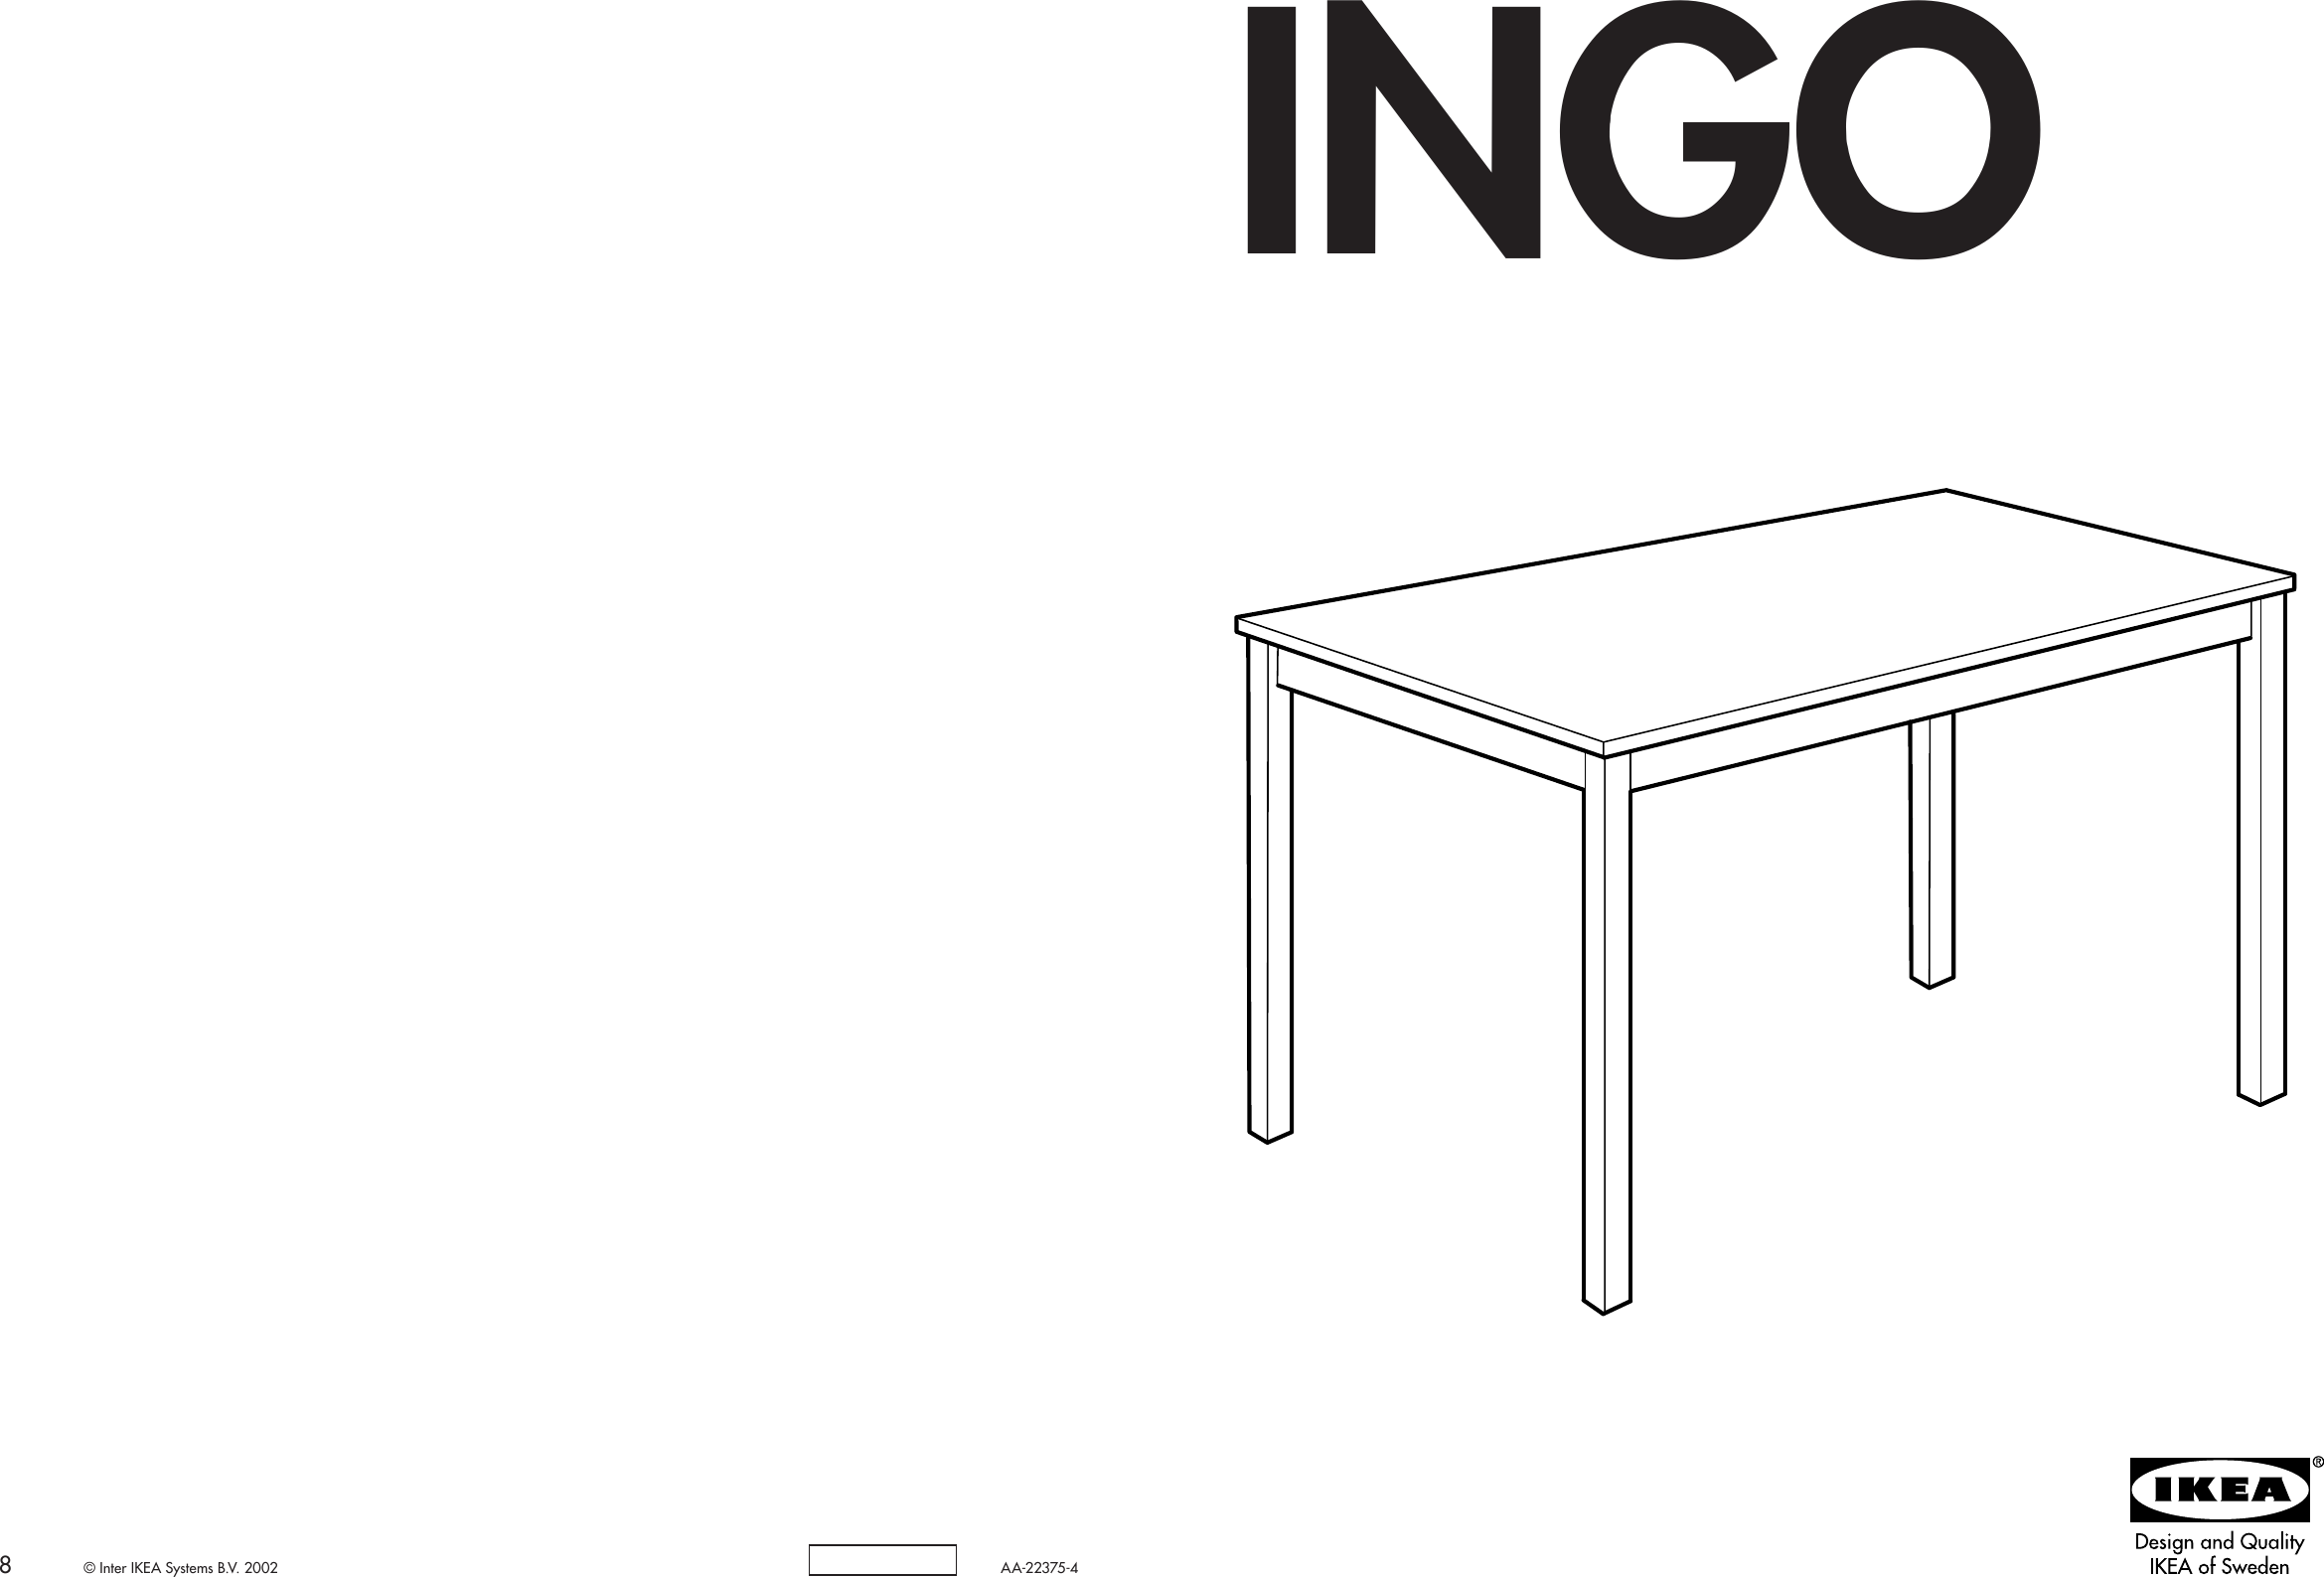 Page 1 of 4 - Ikea Ikea-Ingo-Dining-Table-47-1-4X29-1-2-Assembly-Instruction